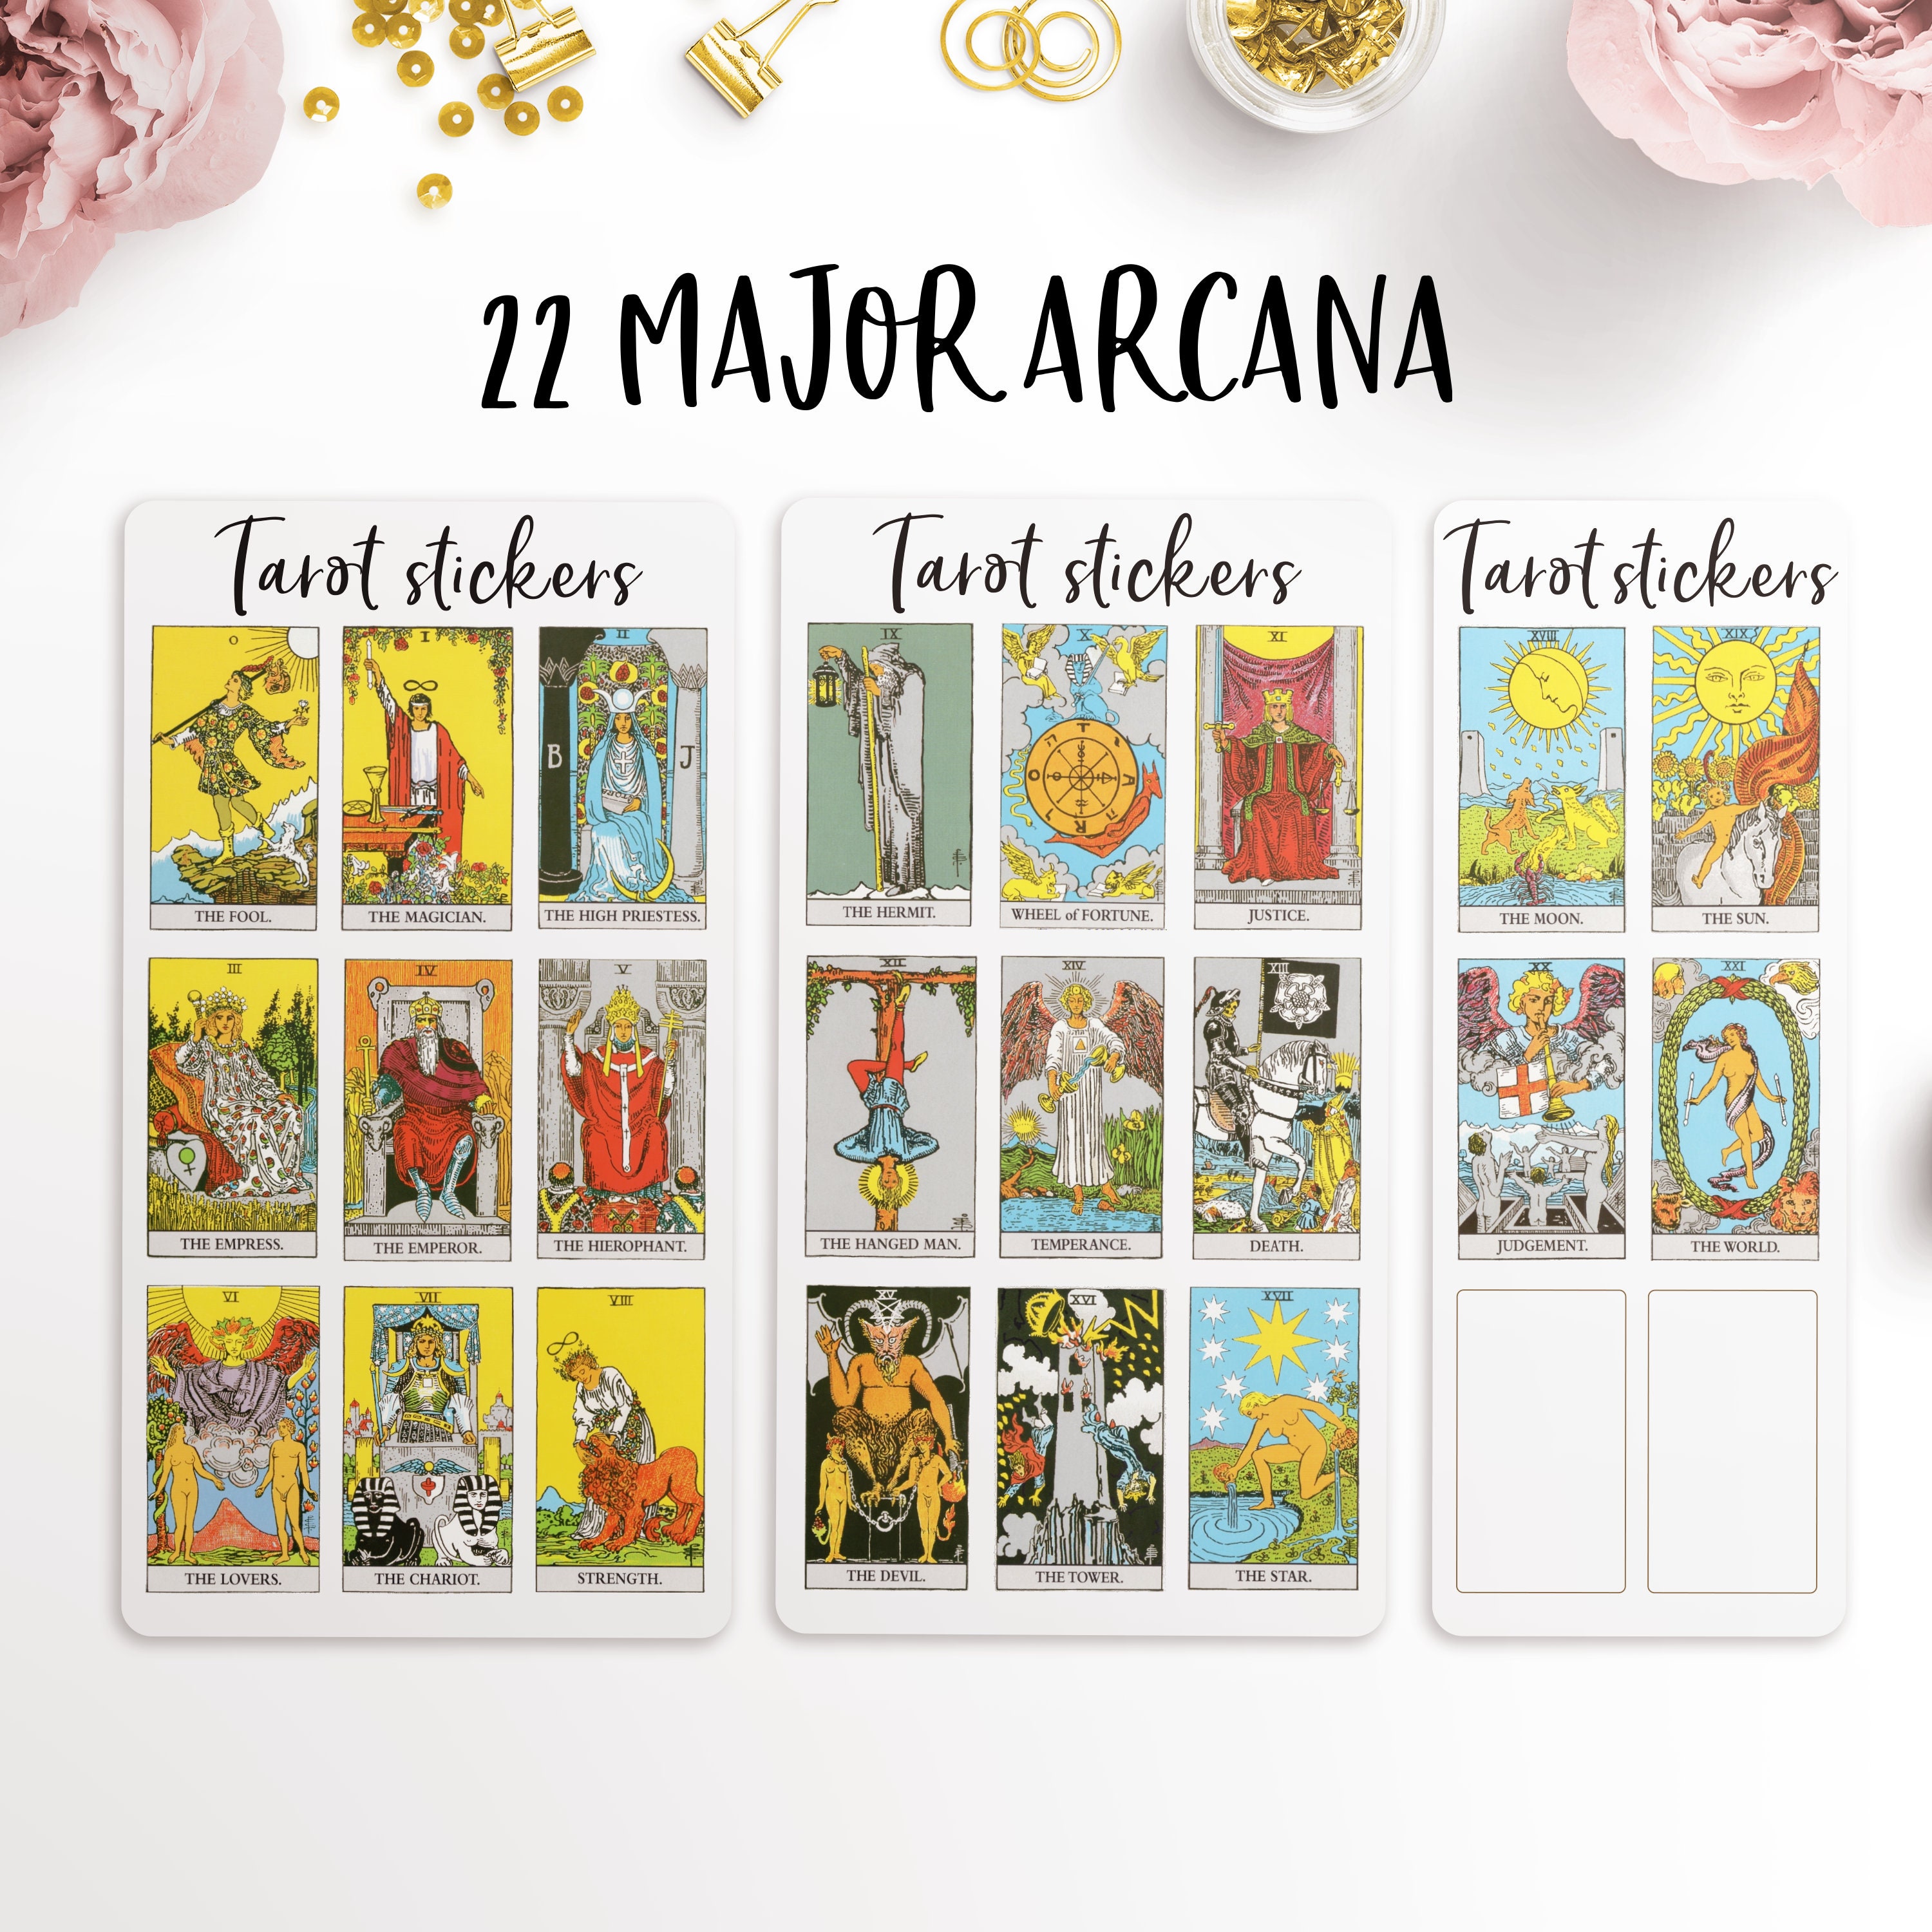 Tarot Planner Pages Graphic by Mine Eyes Design · Creative Fabrica